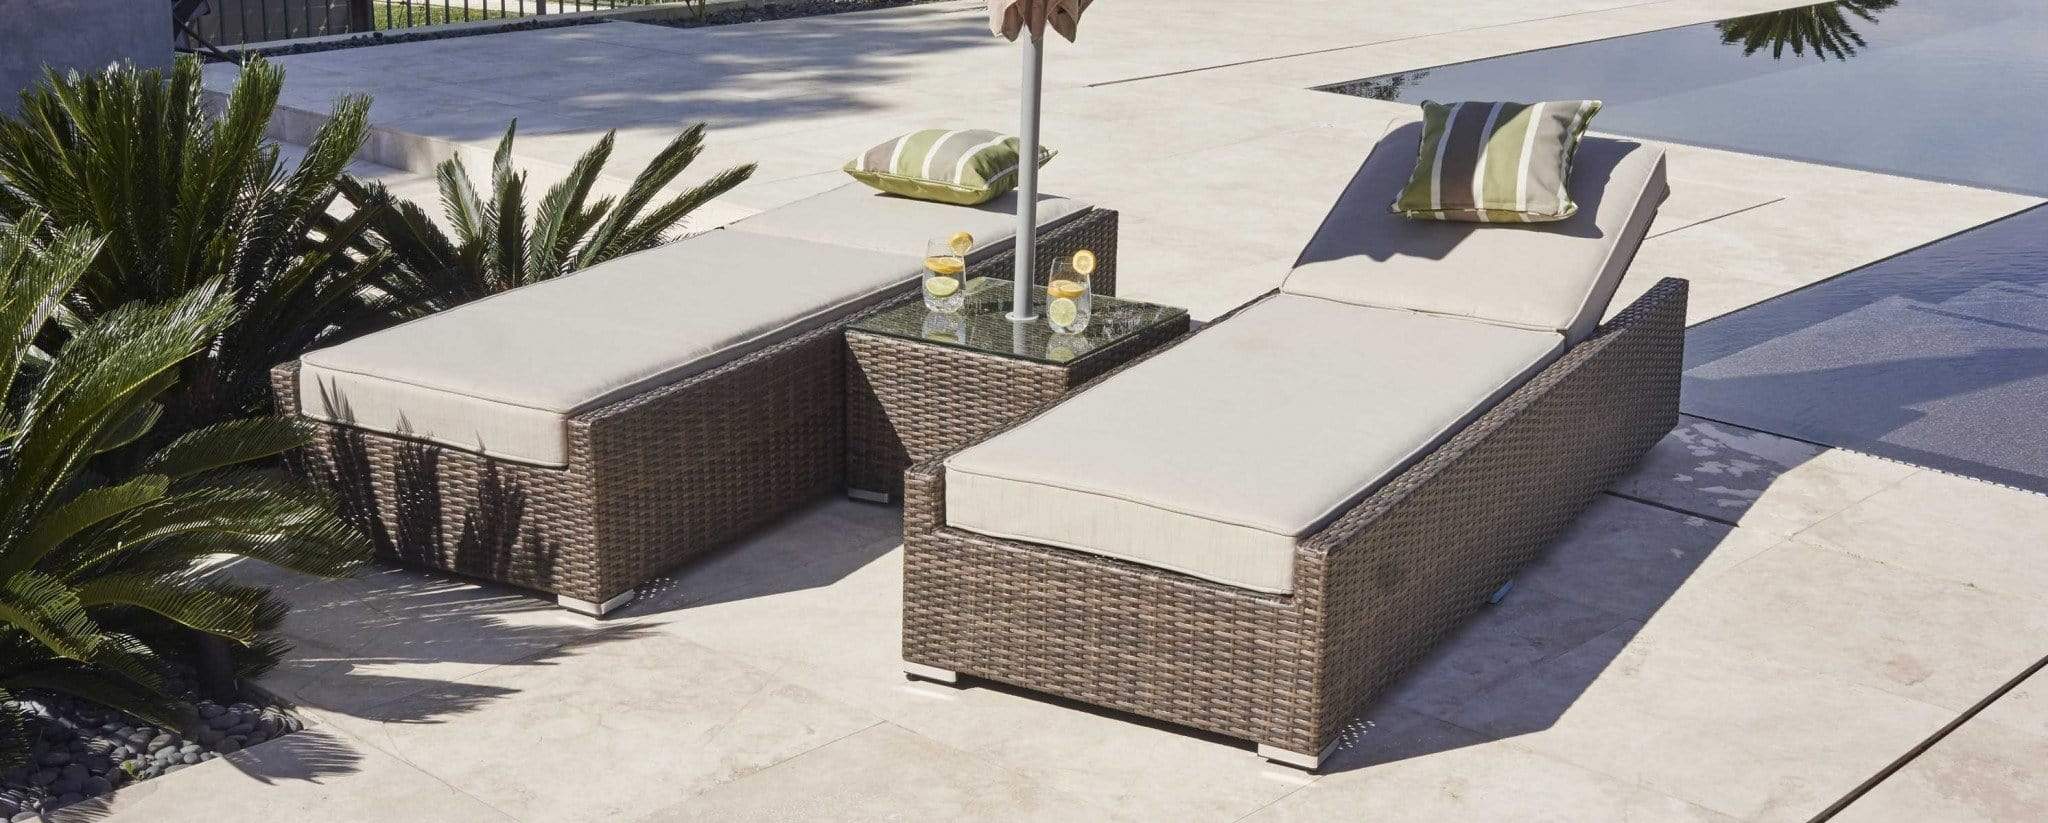 HomeRoots Furniture Chaise Lounge Brown 3-Piece Wicker Outdoor Armless Chaise Lounge Set with  Tan Cushions - 78" X 29" X 28"